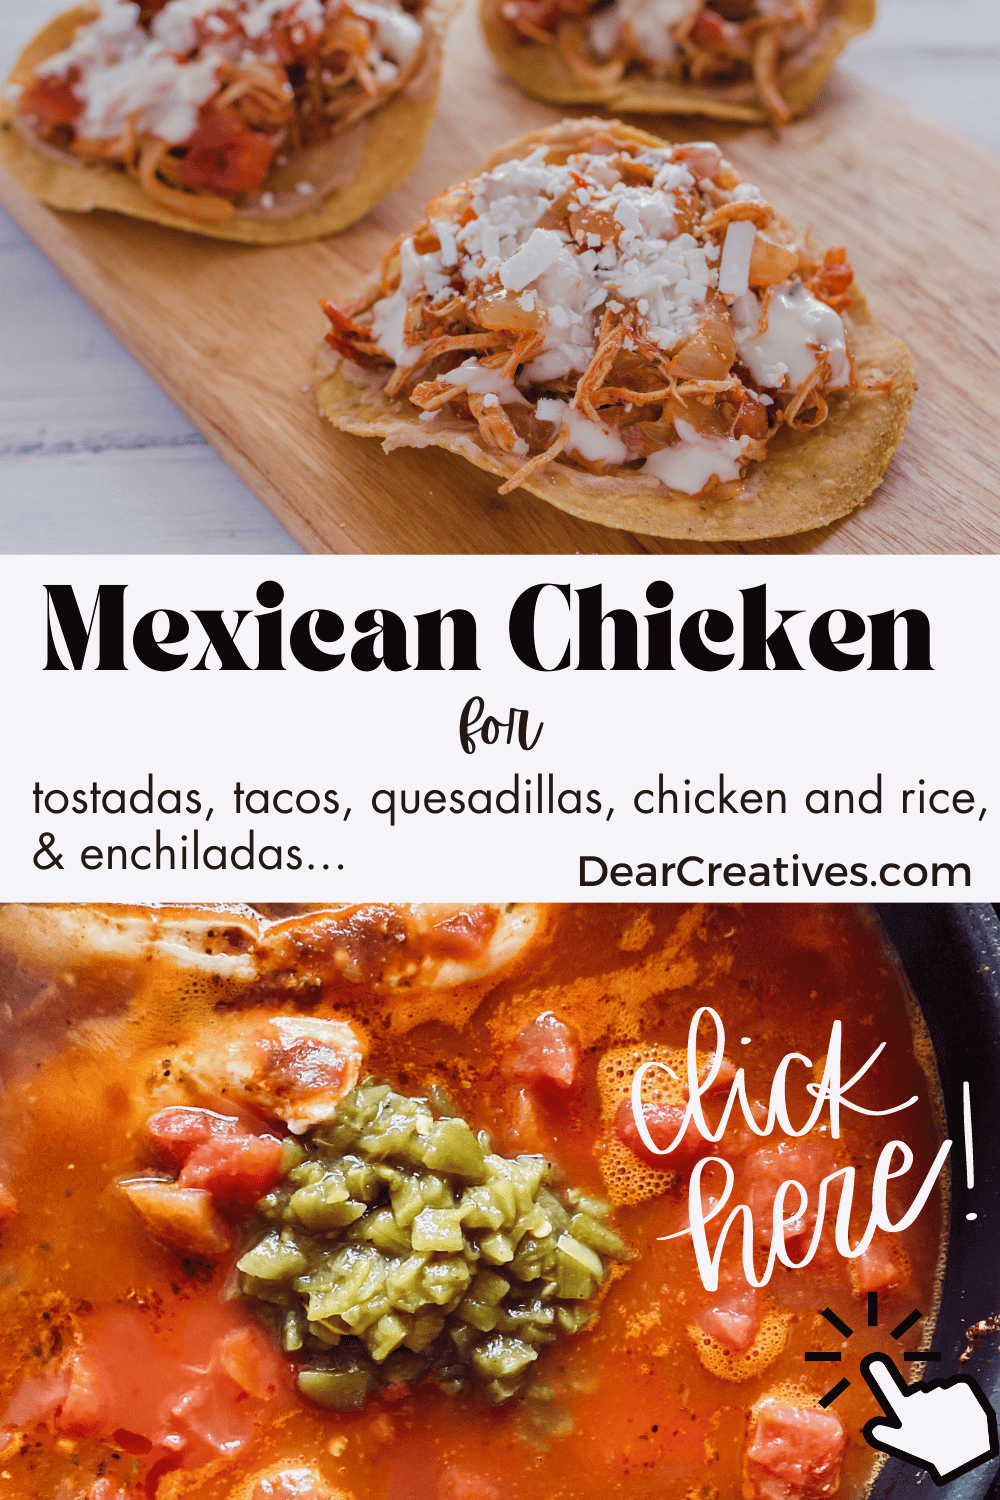 Mexican Chicken  Recipe - How to make Mexican Chicken on the stove - Cook the chicken and shred or dice it to use for tostadas, tacos, quesadillas, chicken and rice... Print the recipe at DearCreatives.com  (image of tostadas with Mexican chicken and Mexican chicken cooking on the stove) 